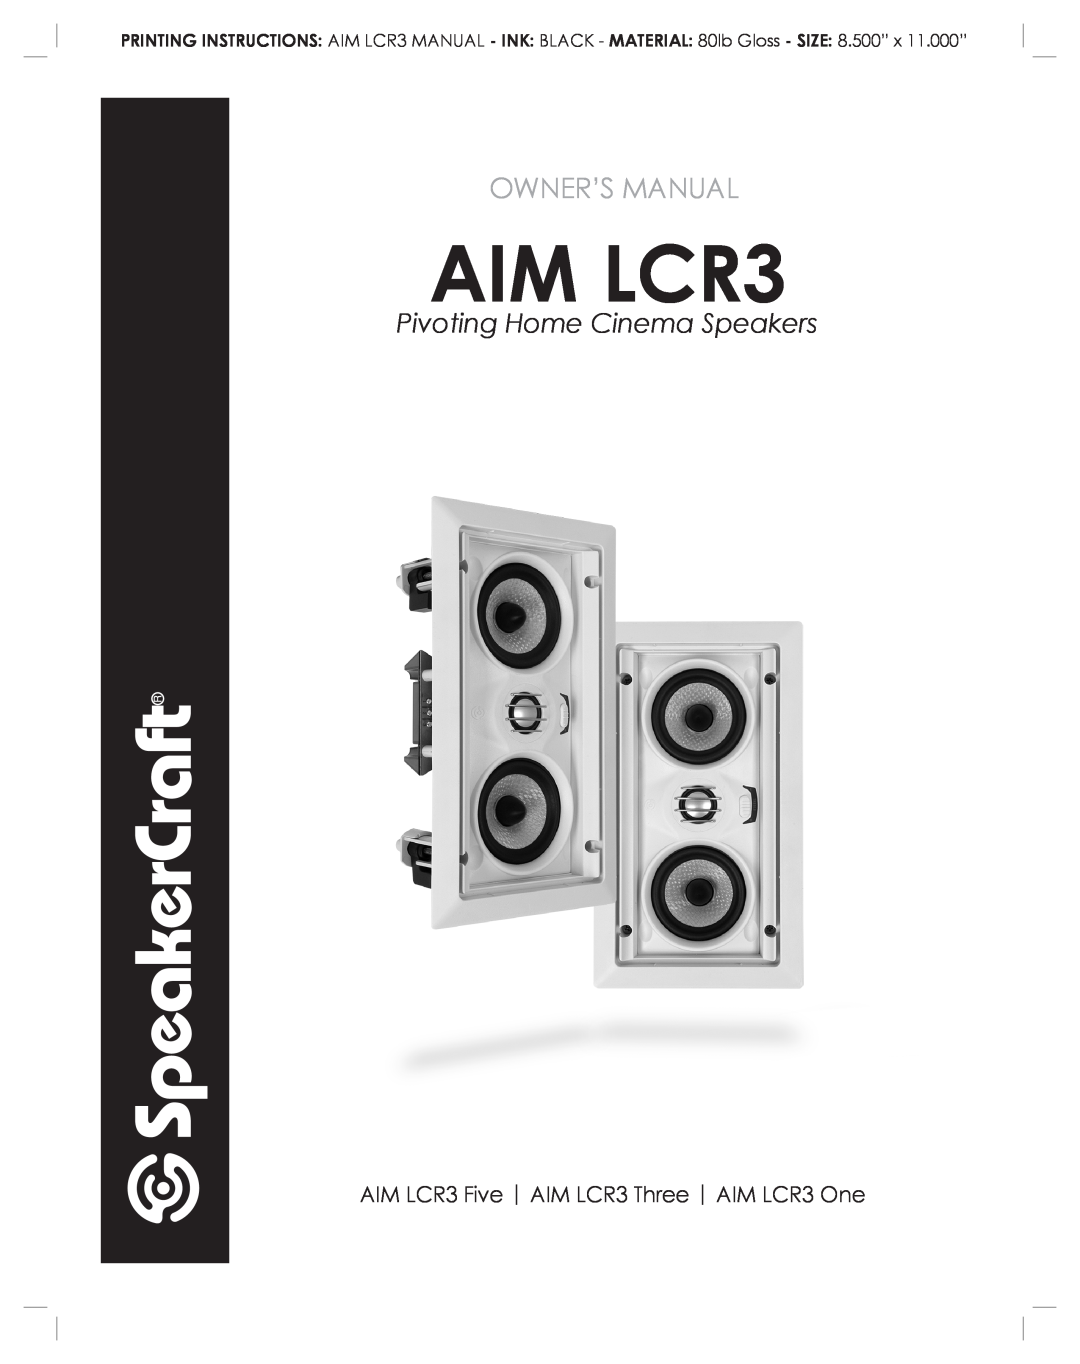 SpeakerCraft owner manual Pivoting Home Cinema Speakers, AIM LCR3 Five AIM LCR3 Three AIM LCR3 One 